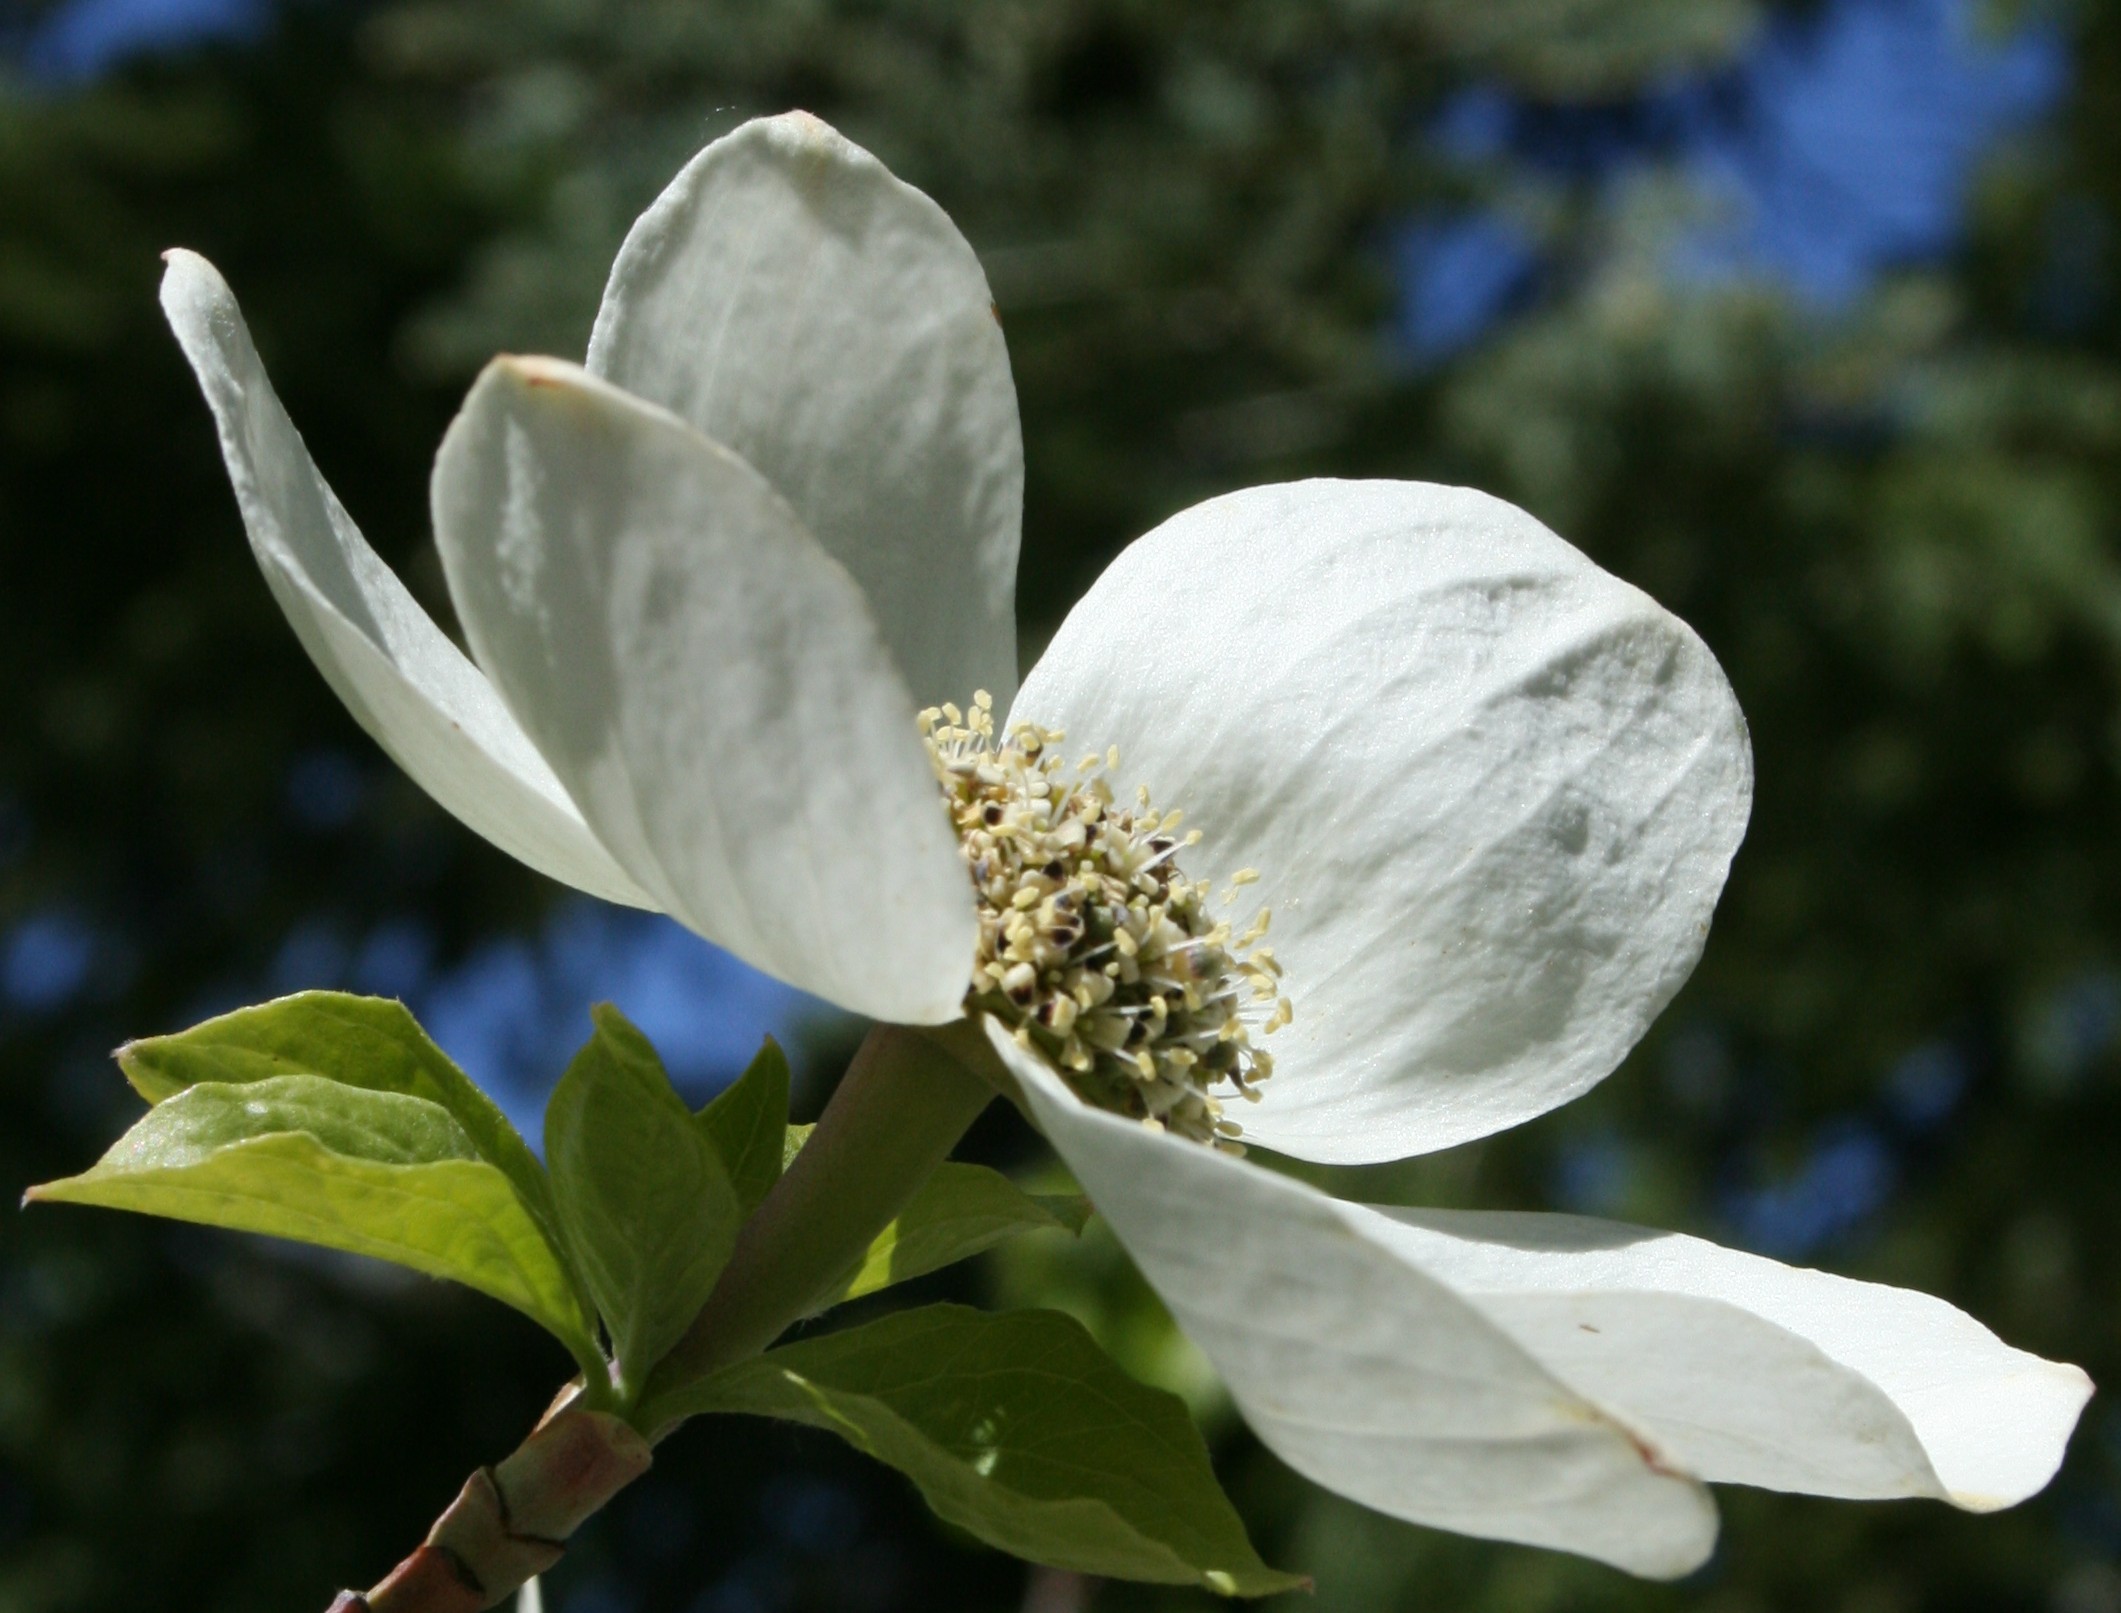 a tree with large white flowers and small green leaves